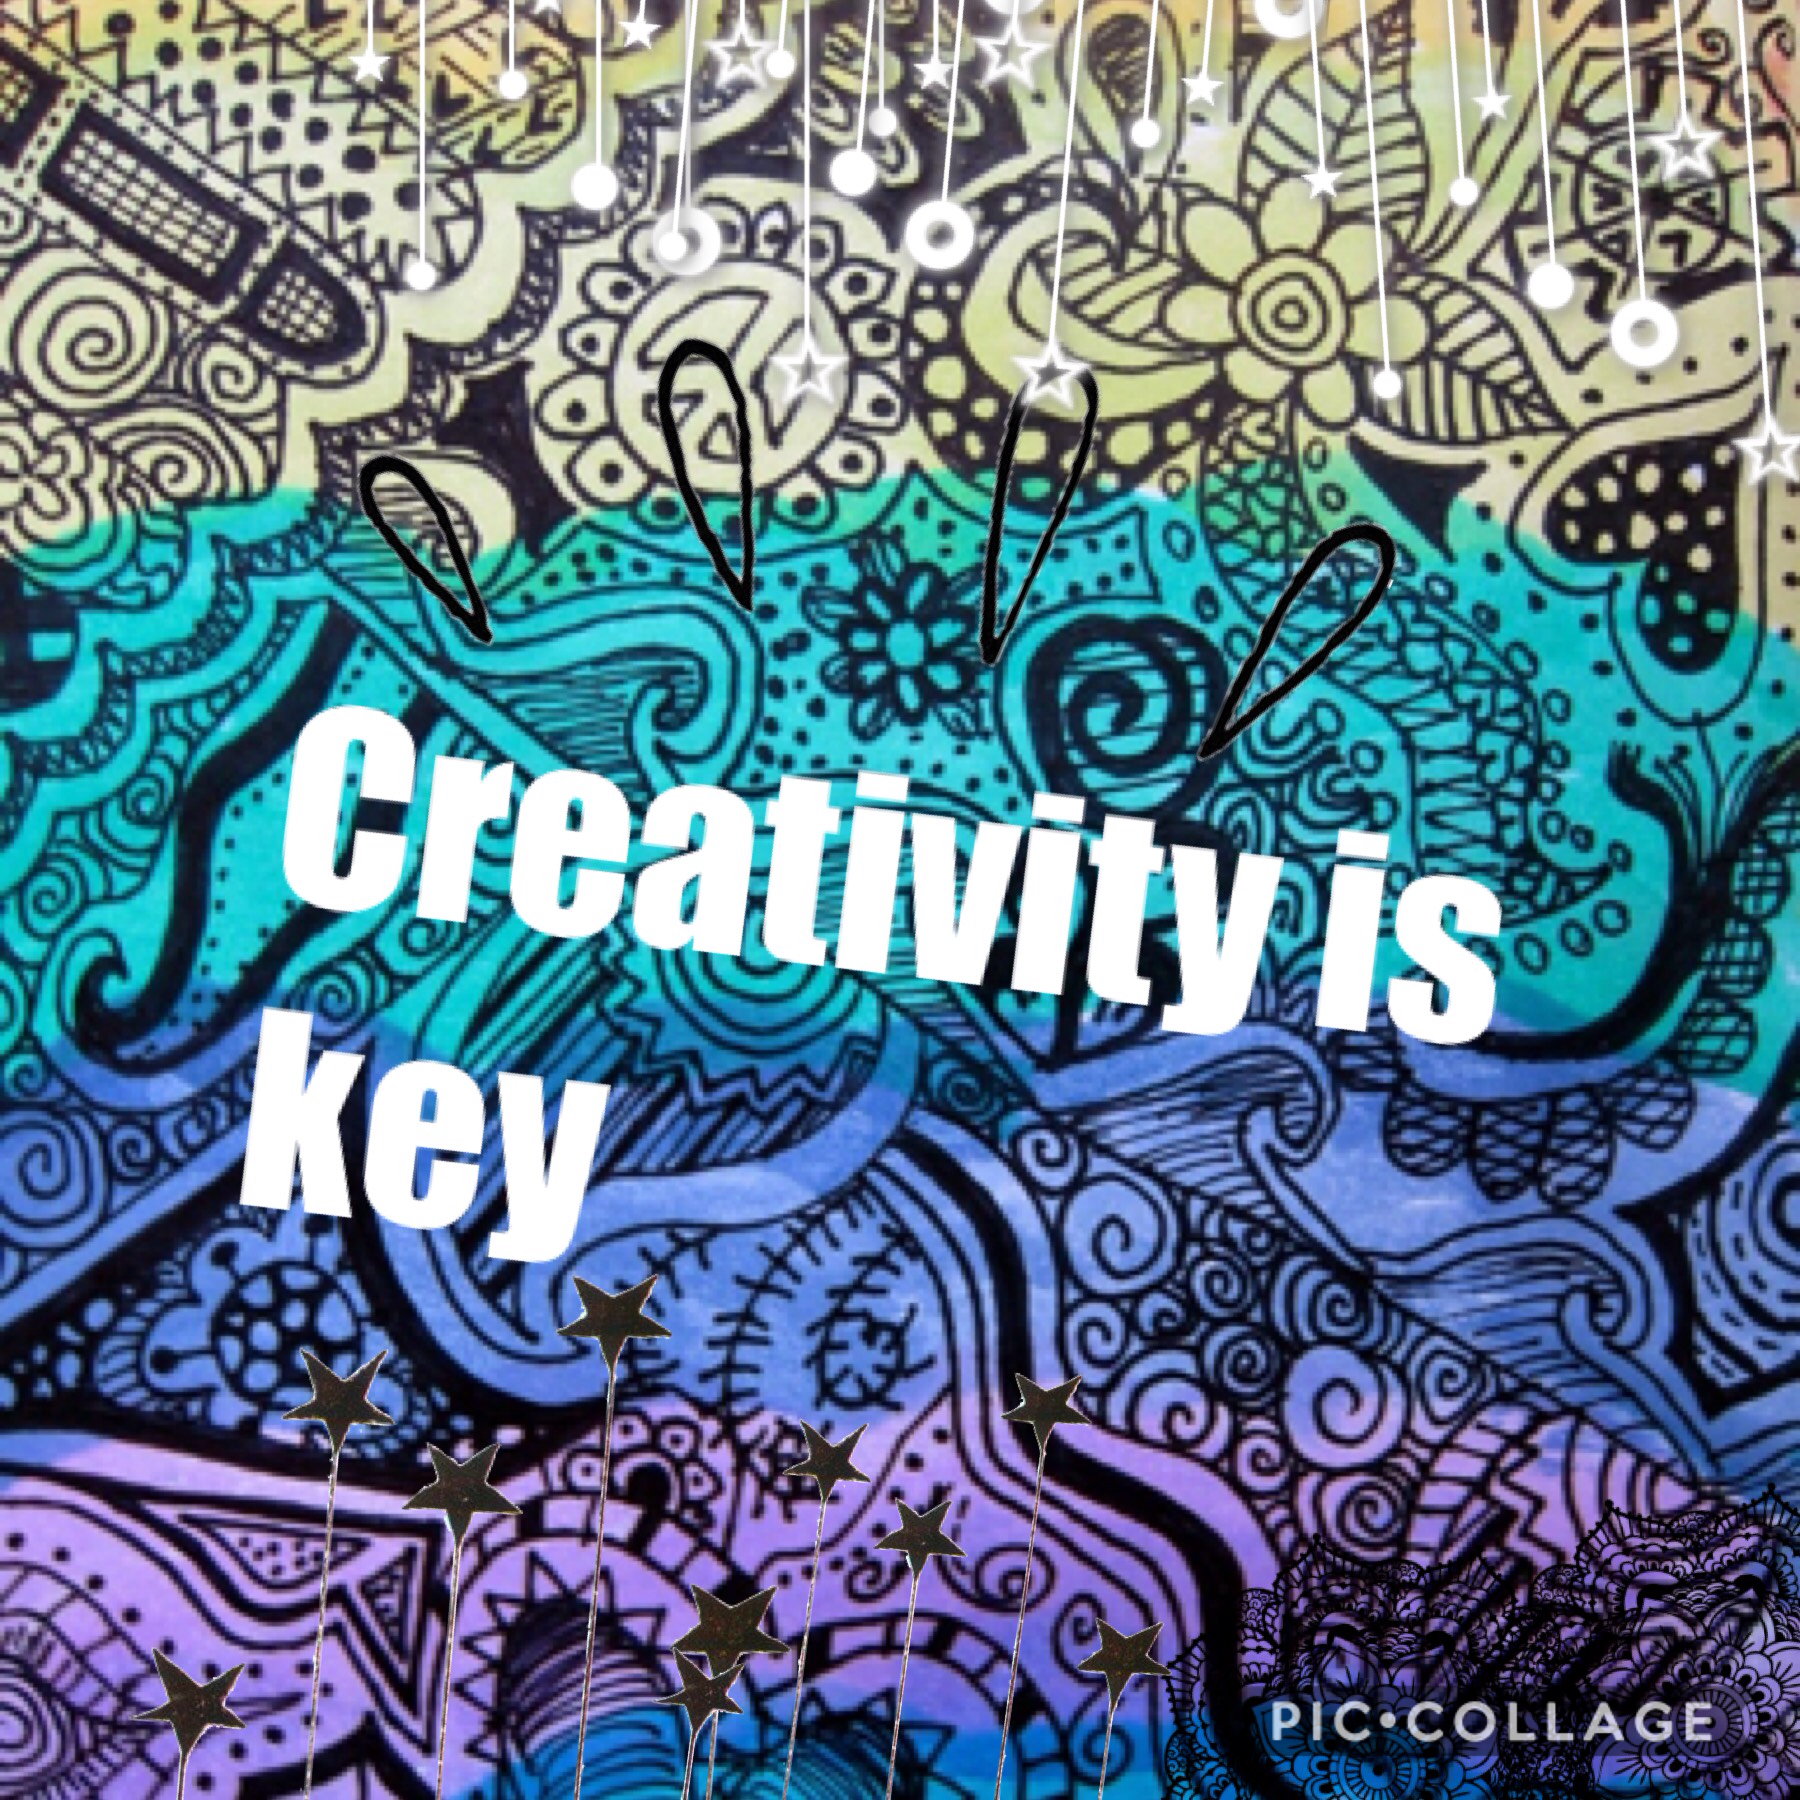 TAP

Creativity is key cause we have to be our selfs!!